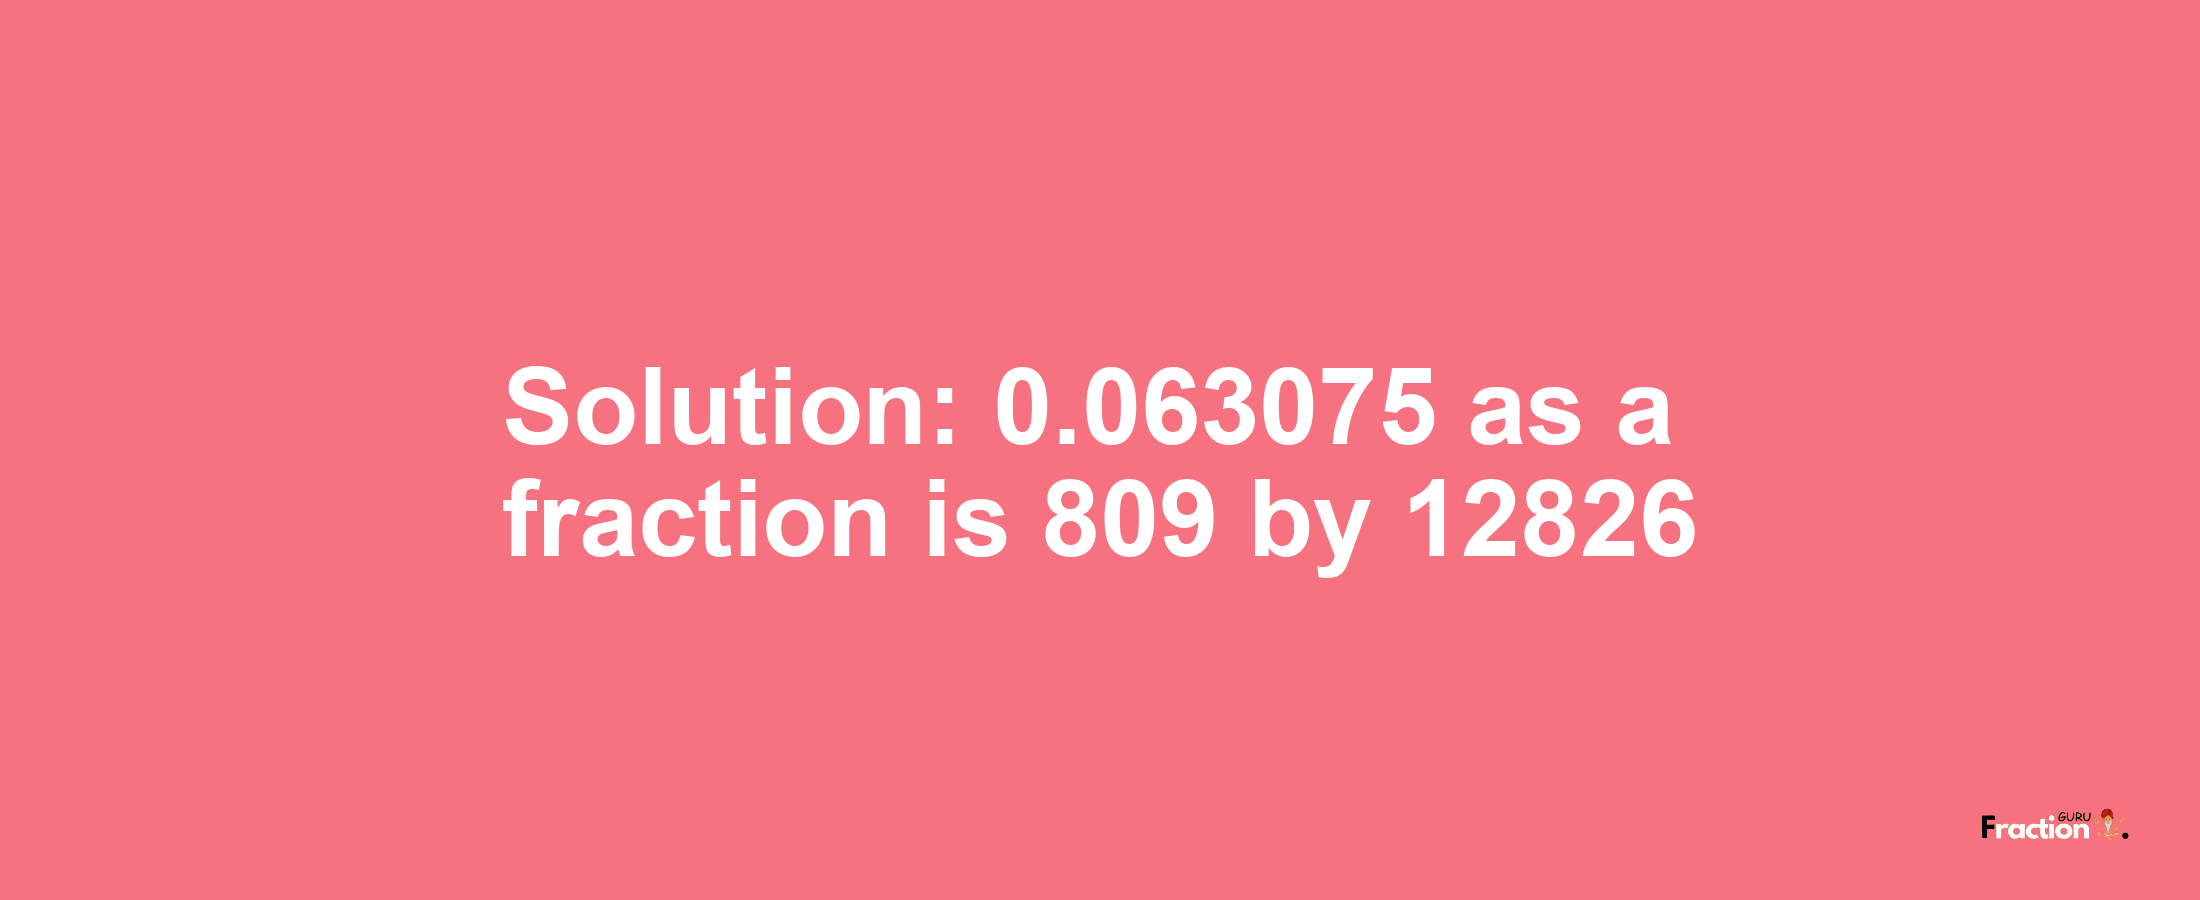 Solution:0.063075 as a fraction is 809/12826